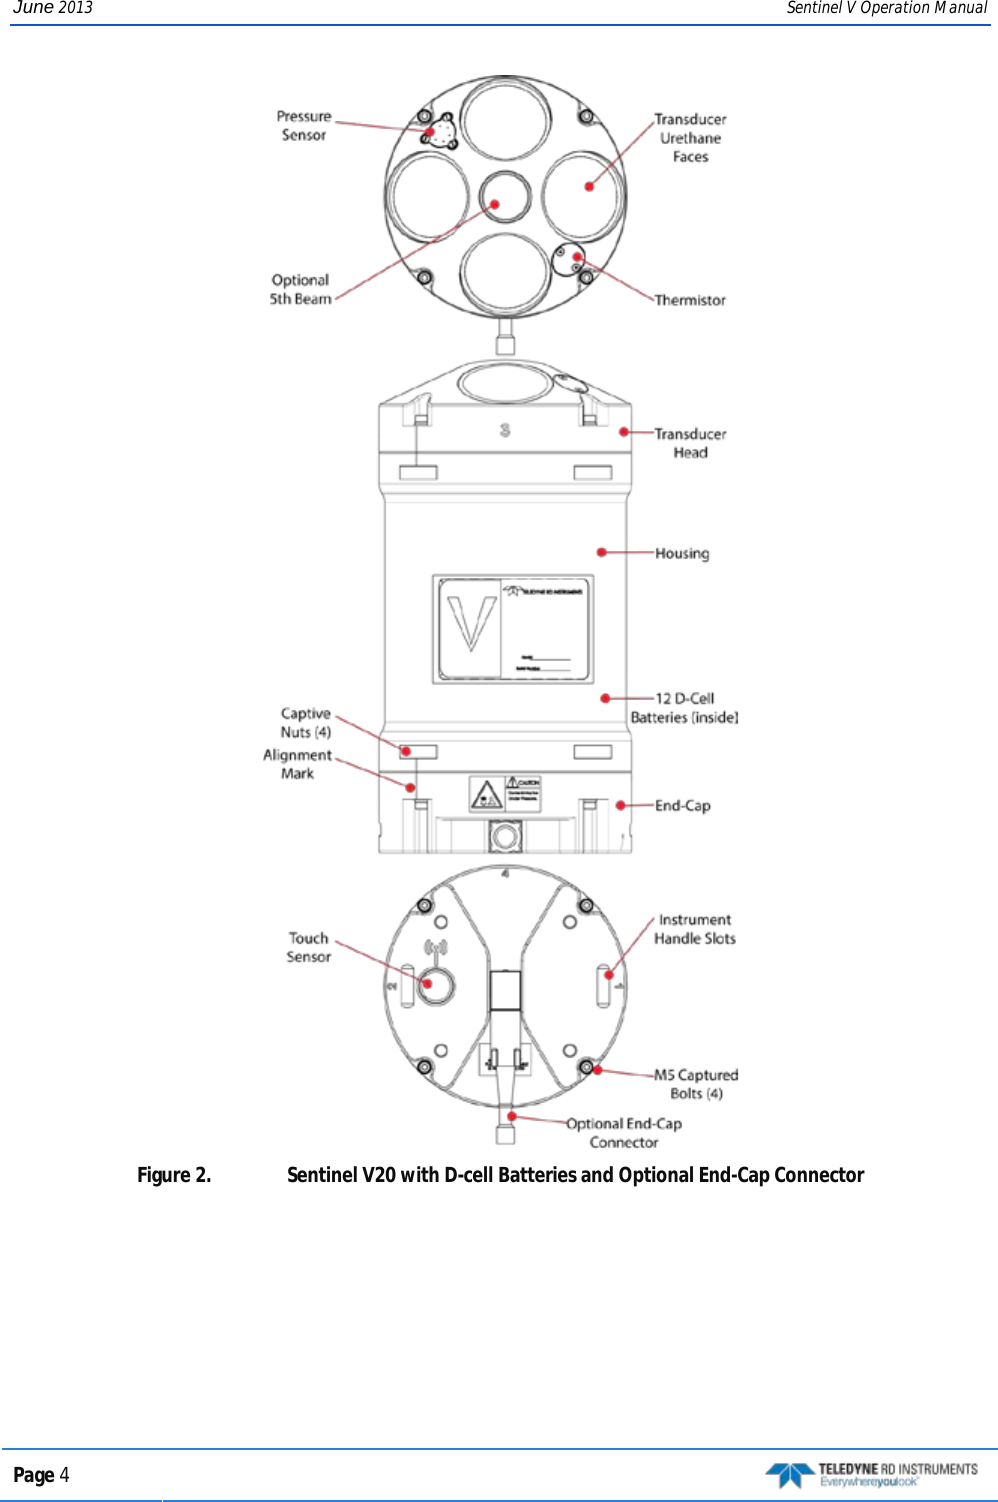 June 2013 Sentinel V Operation Manual  Figure 2.  Sentinel V20 with D-cell Batteries and Optional End-Cap Connector  Page 4   